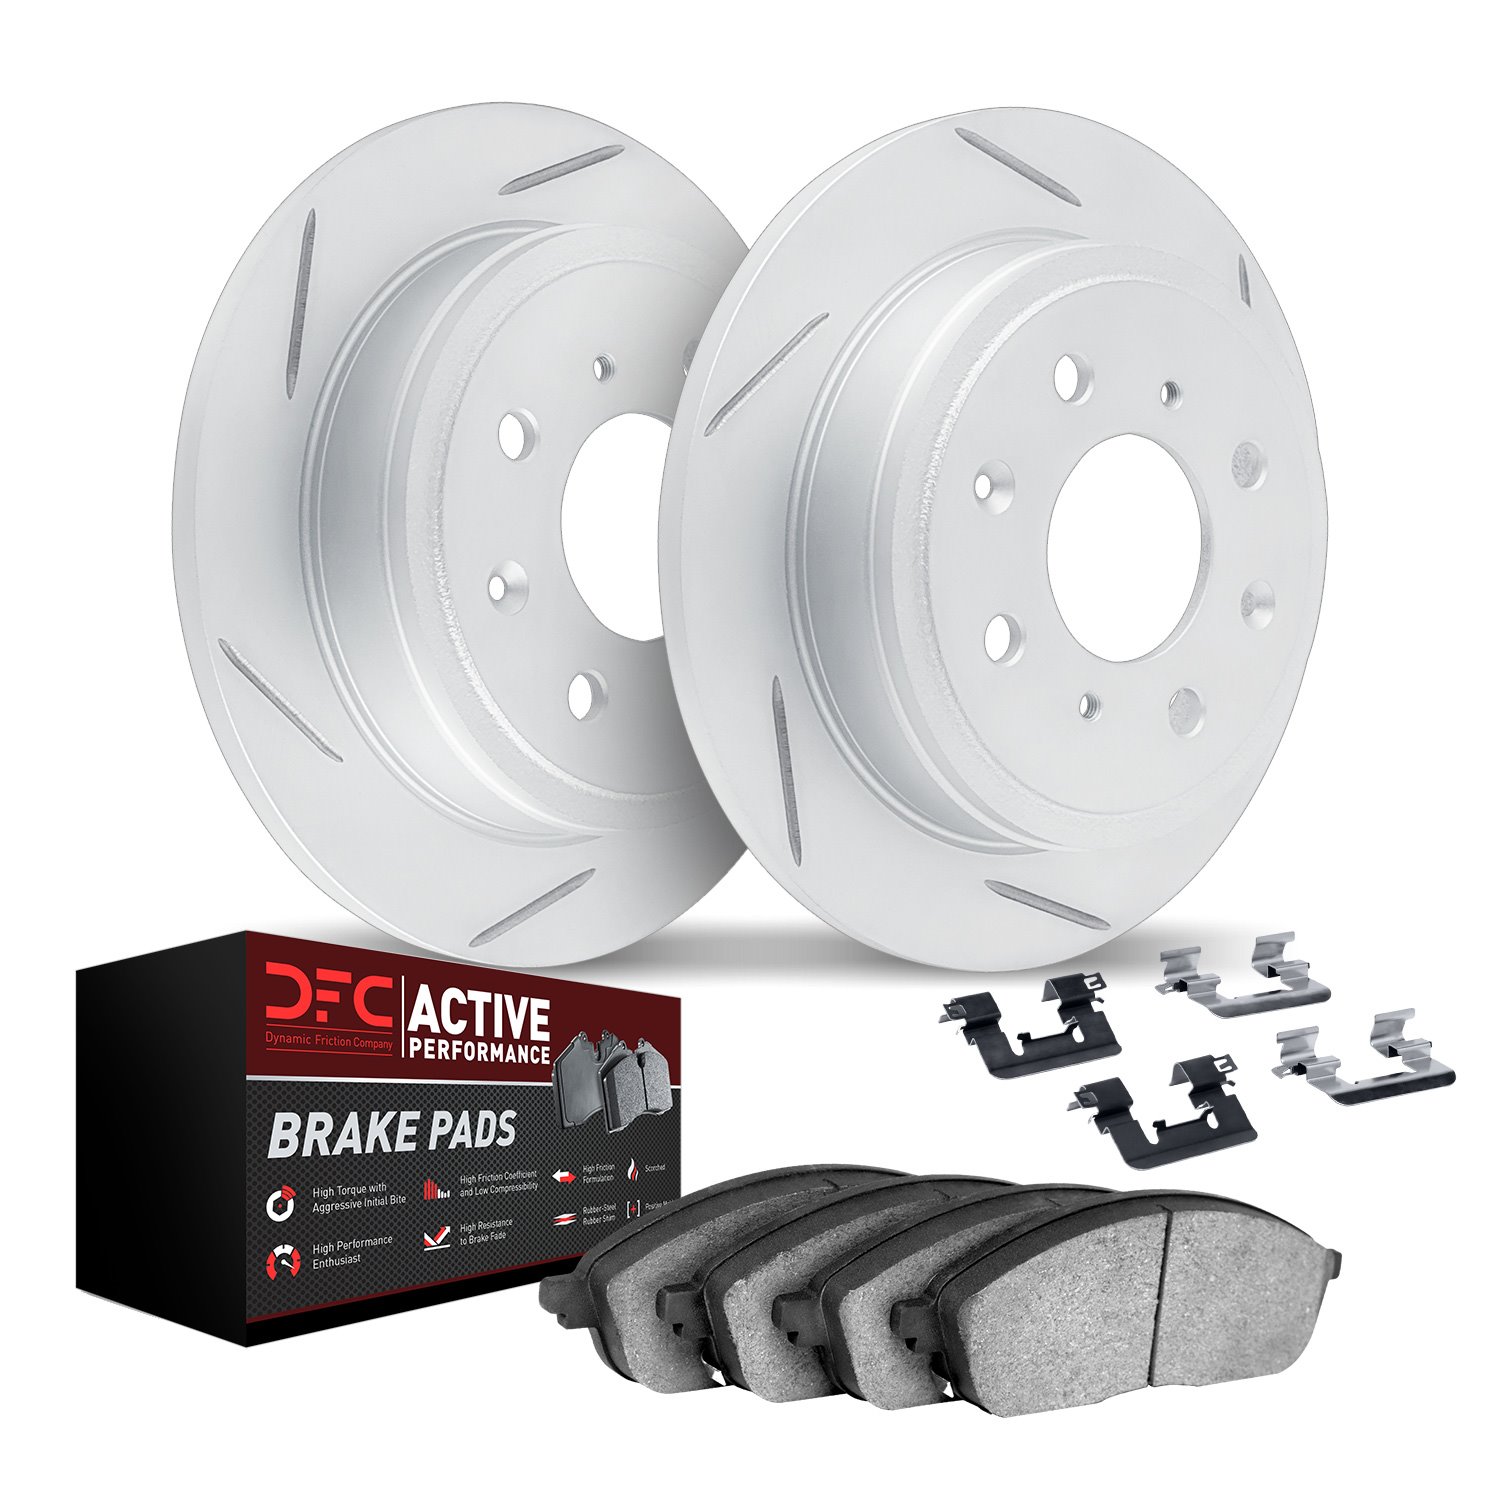 2712-80051 Geoperformance Slotted Brake Rotors with Active Performance Pads Kits & Hardware, Fits Select Multiple Makes/Models,